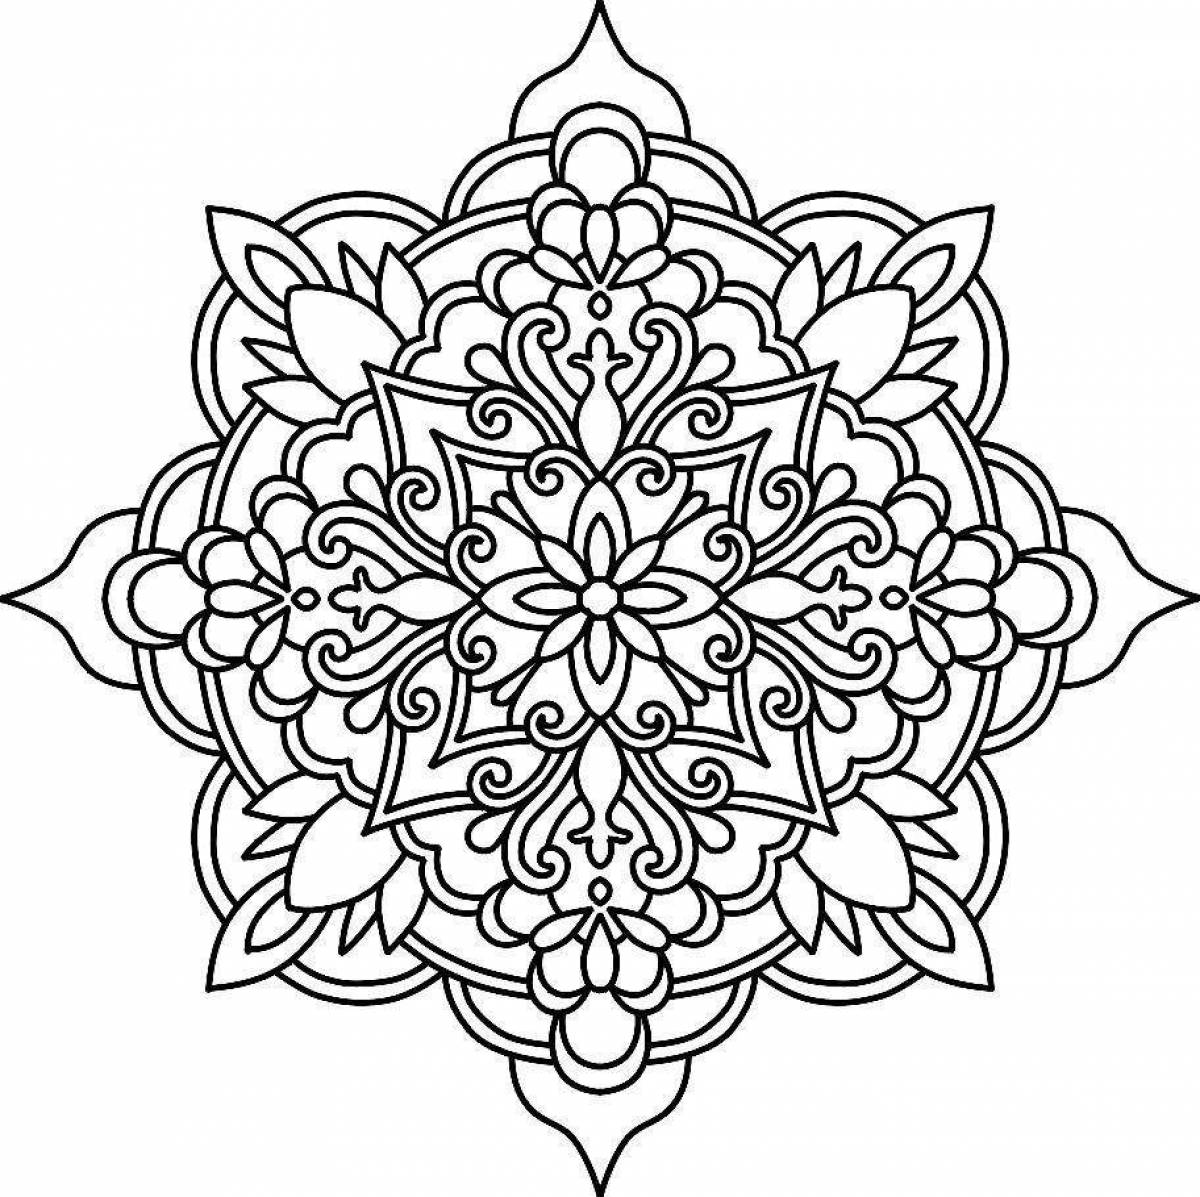 Living ornament coloring page